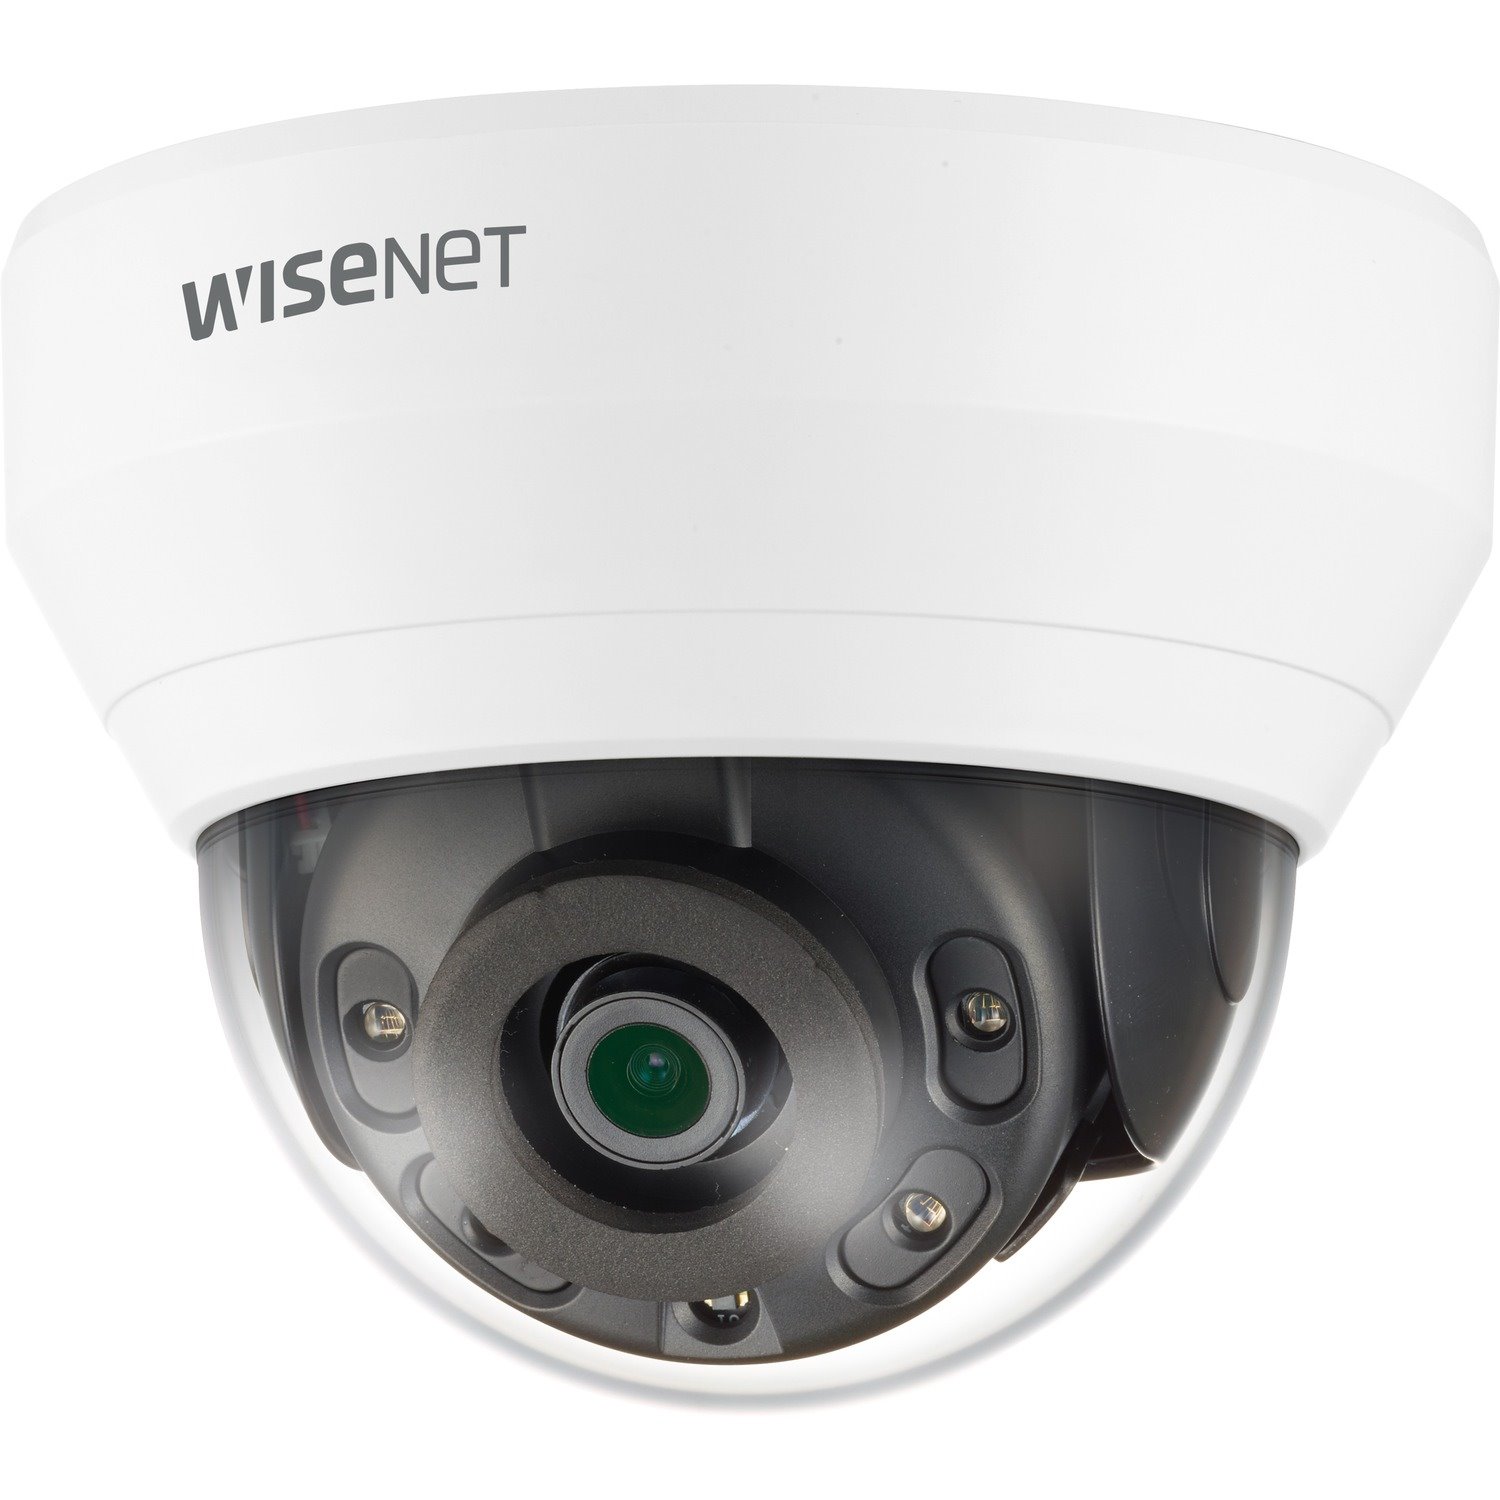 Wisenet QND-6012R 2 Megapixel Indoor Full HD Network Camera - Colour - Dome - White